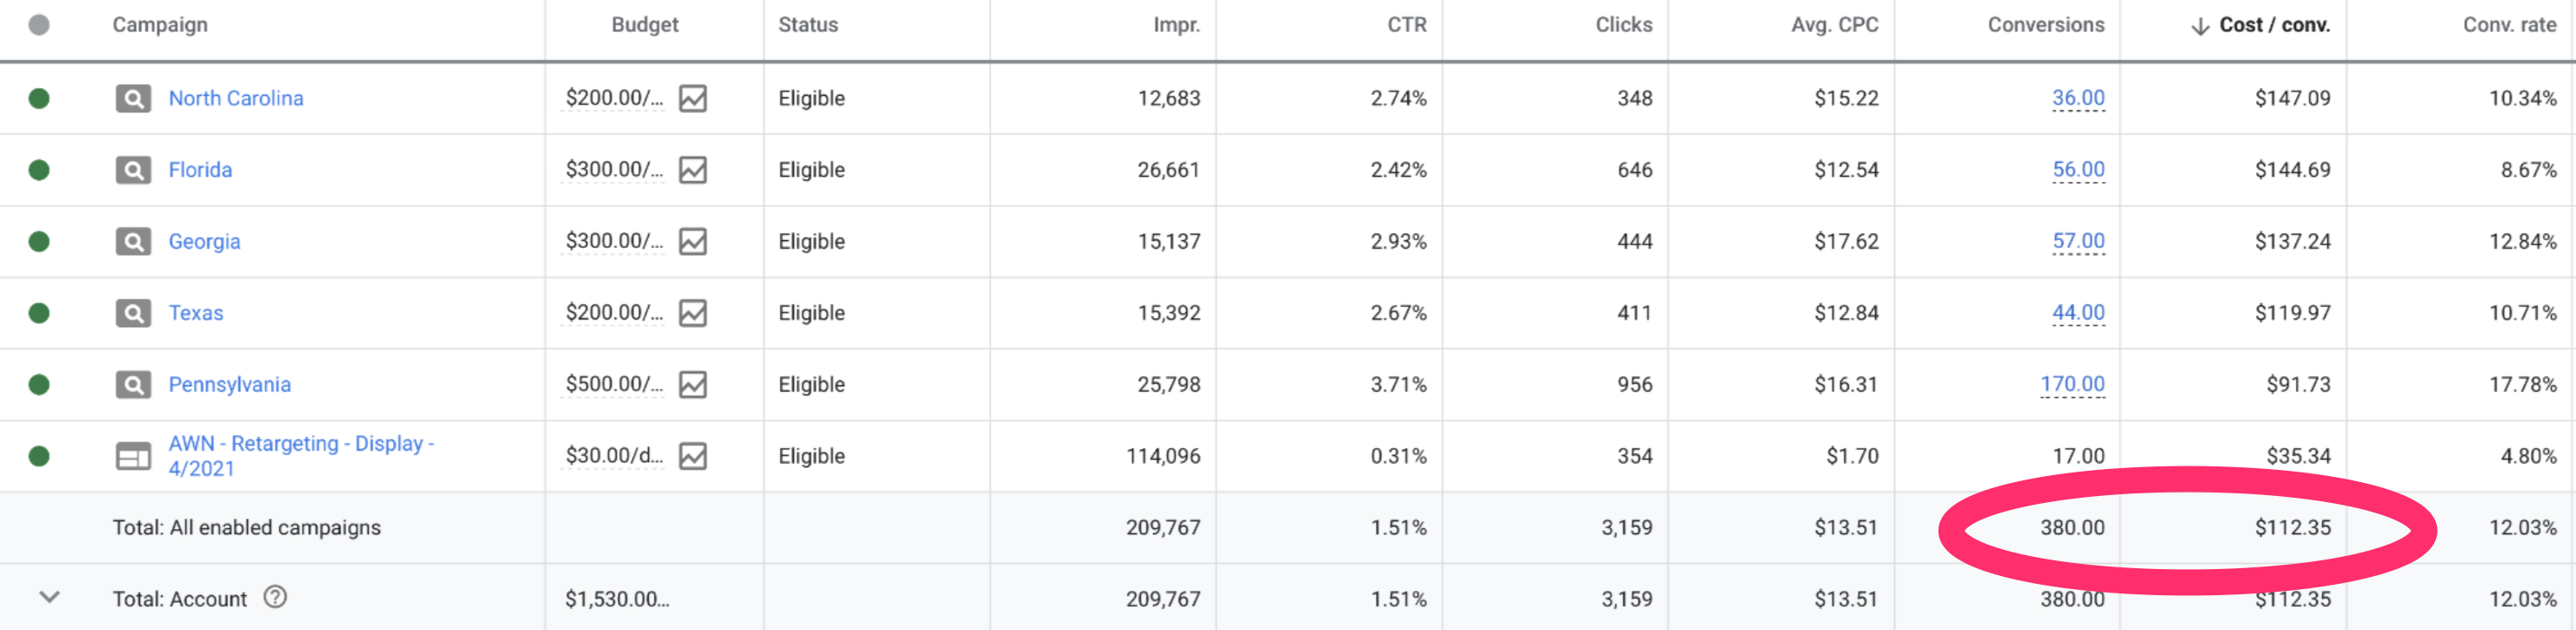 adwords nerds results 4